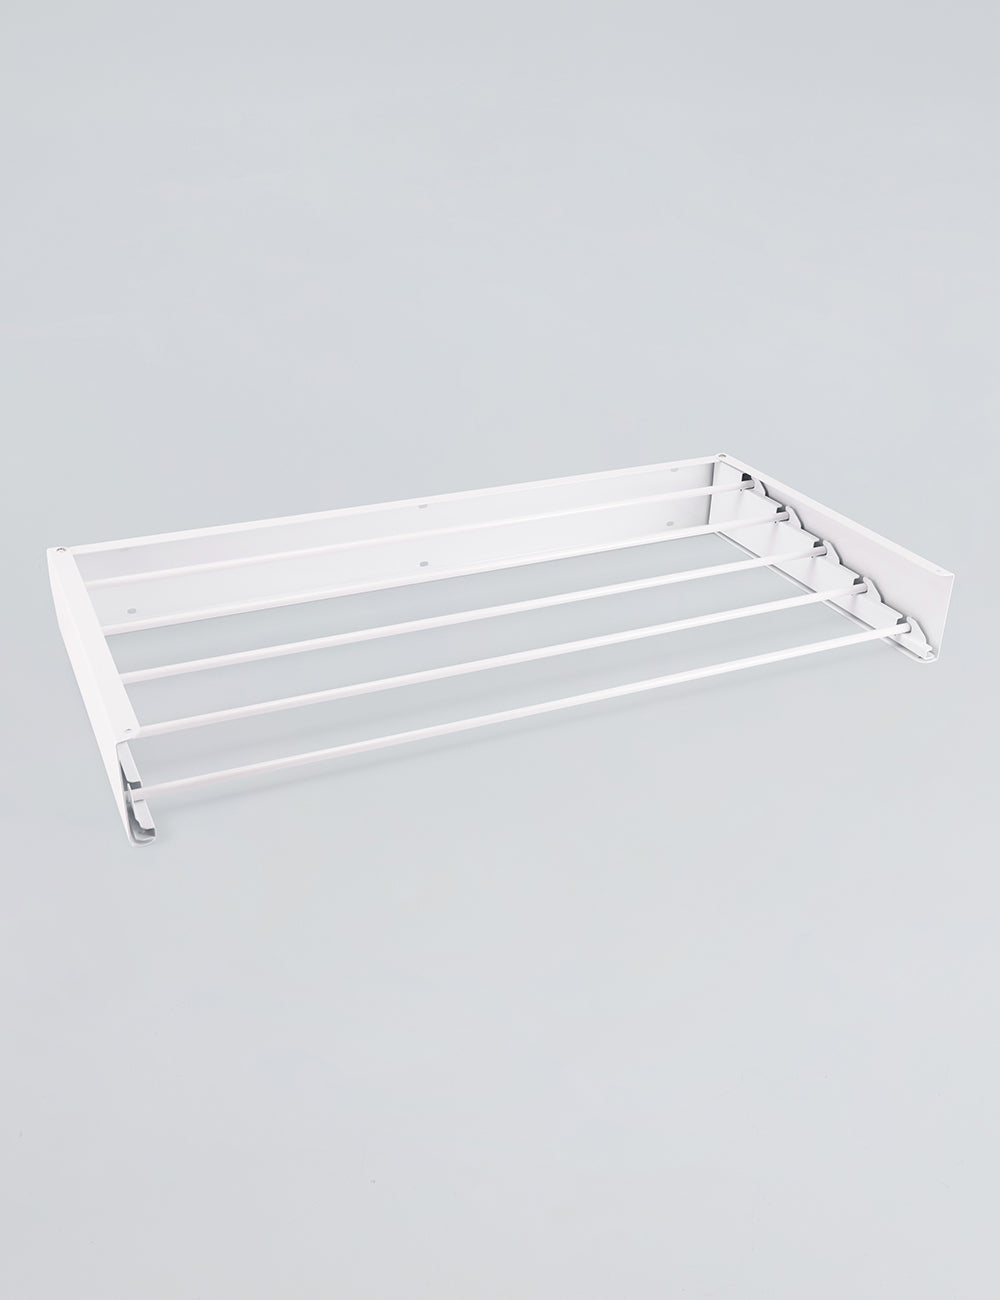 Wall Mounted Drying Rack - Foldable Indoor and Outdoor Drying Rack